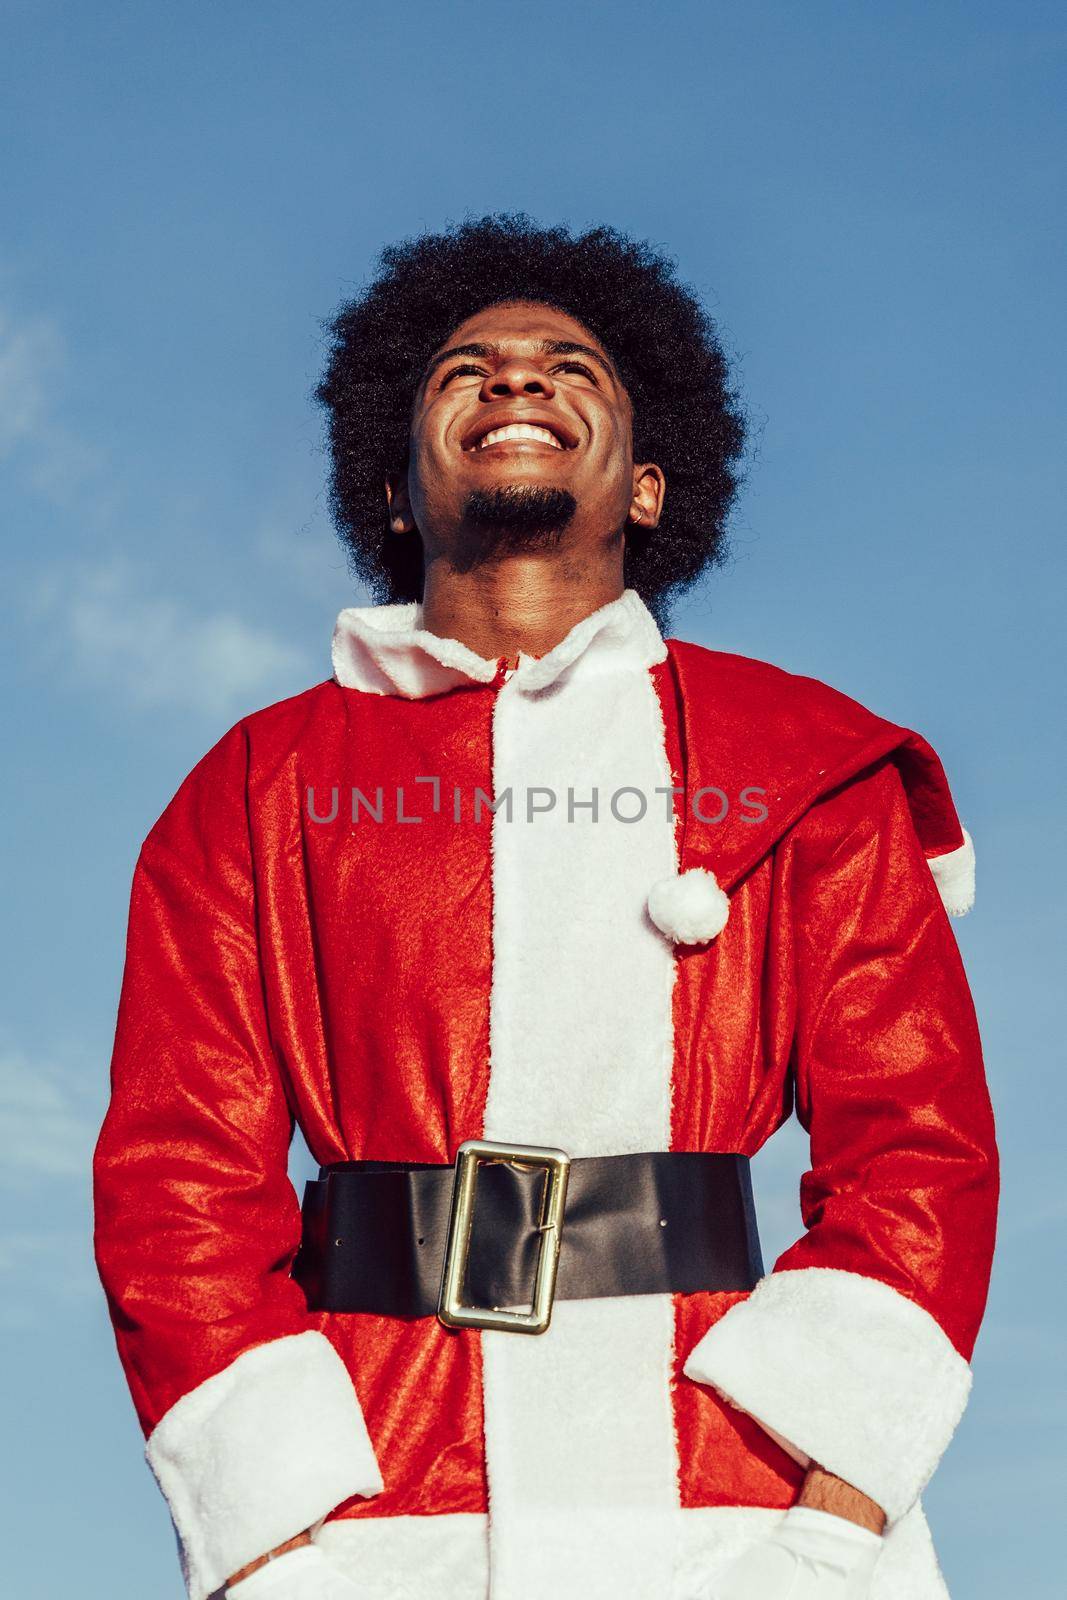 african american santa claus with afro hair looking up and smiling over sky background